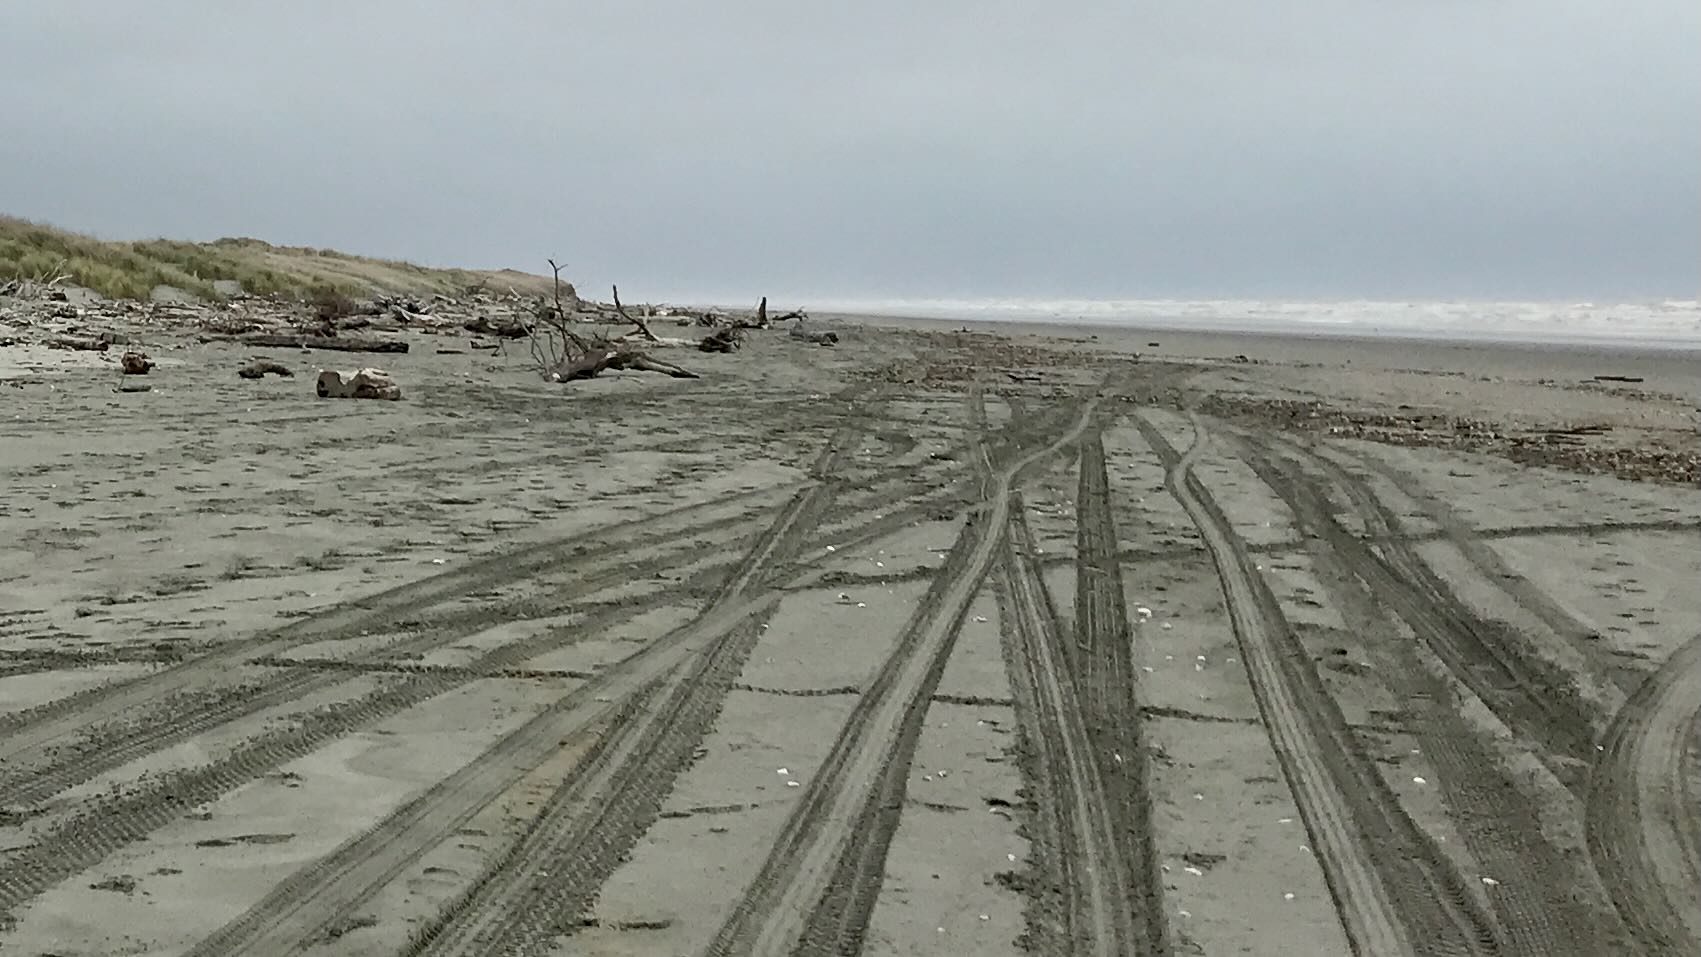 Numerous tire tracks in the sand, heading south. 